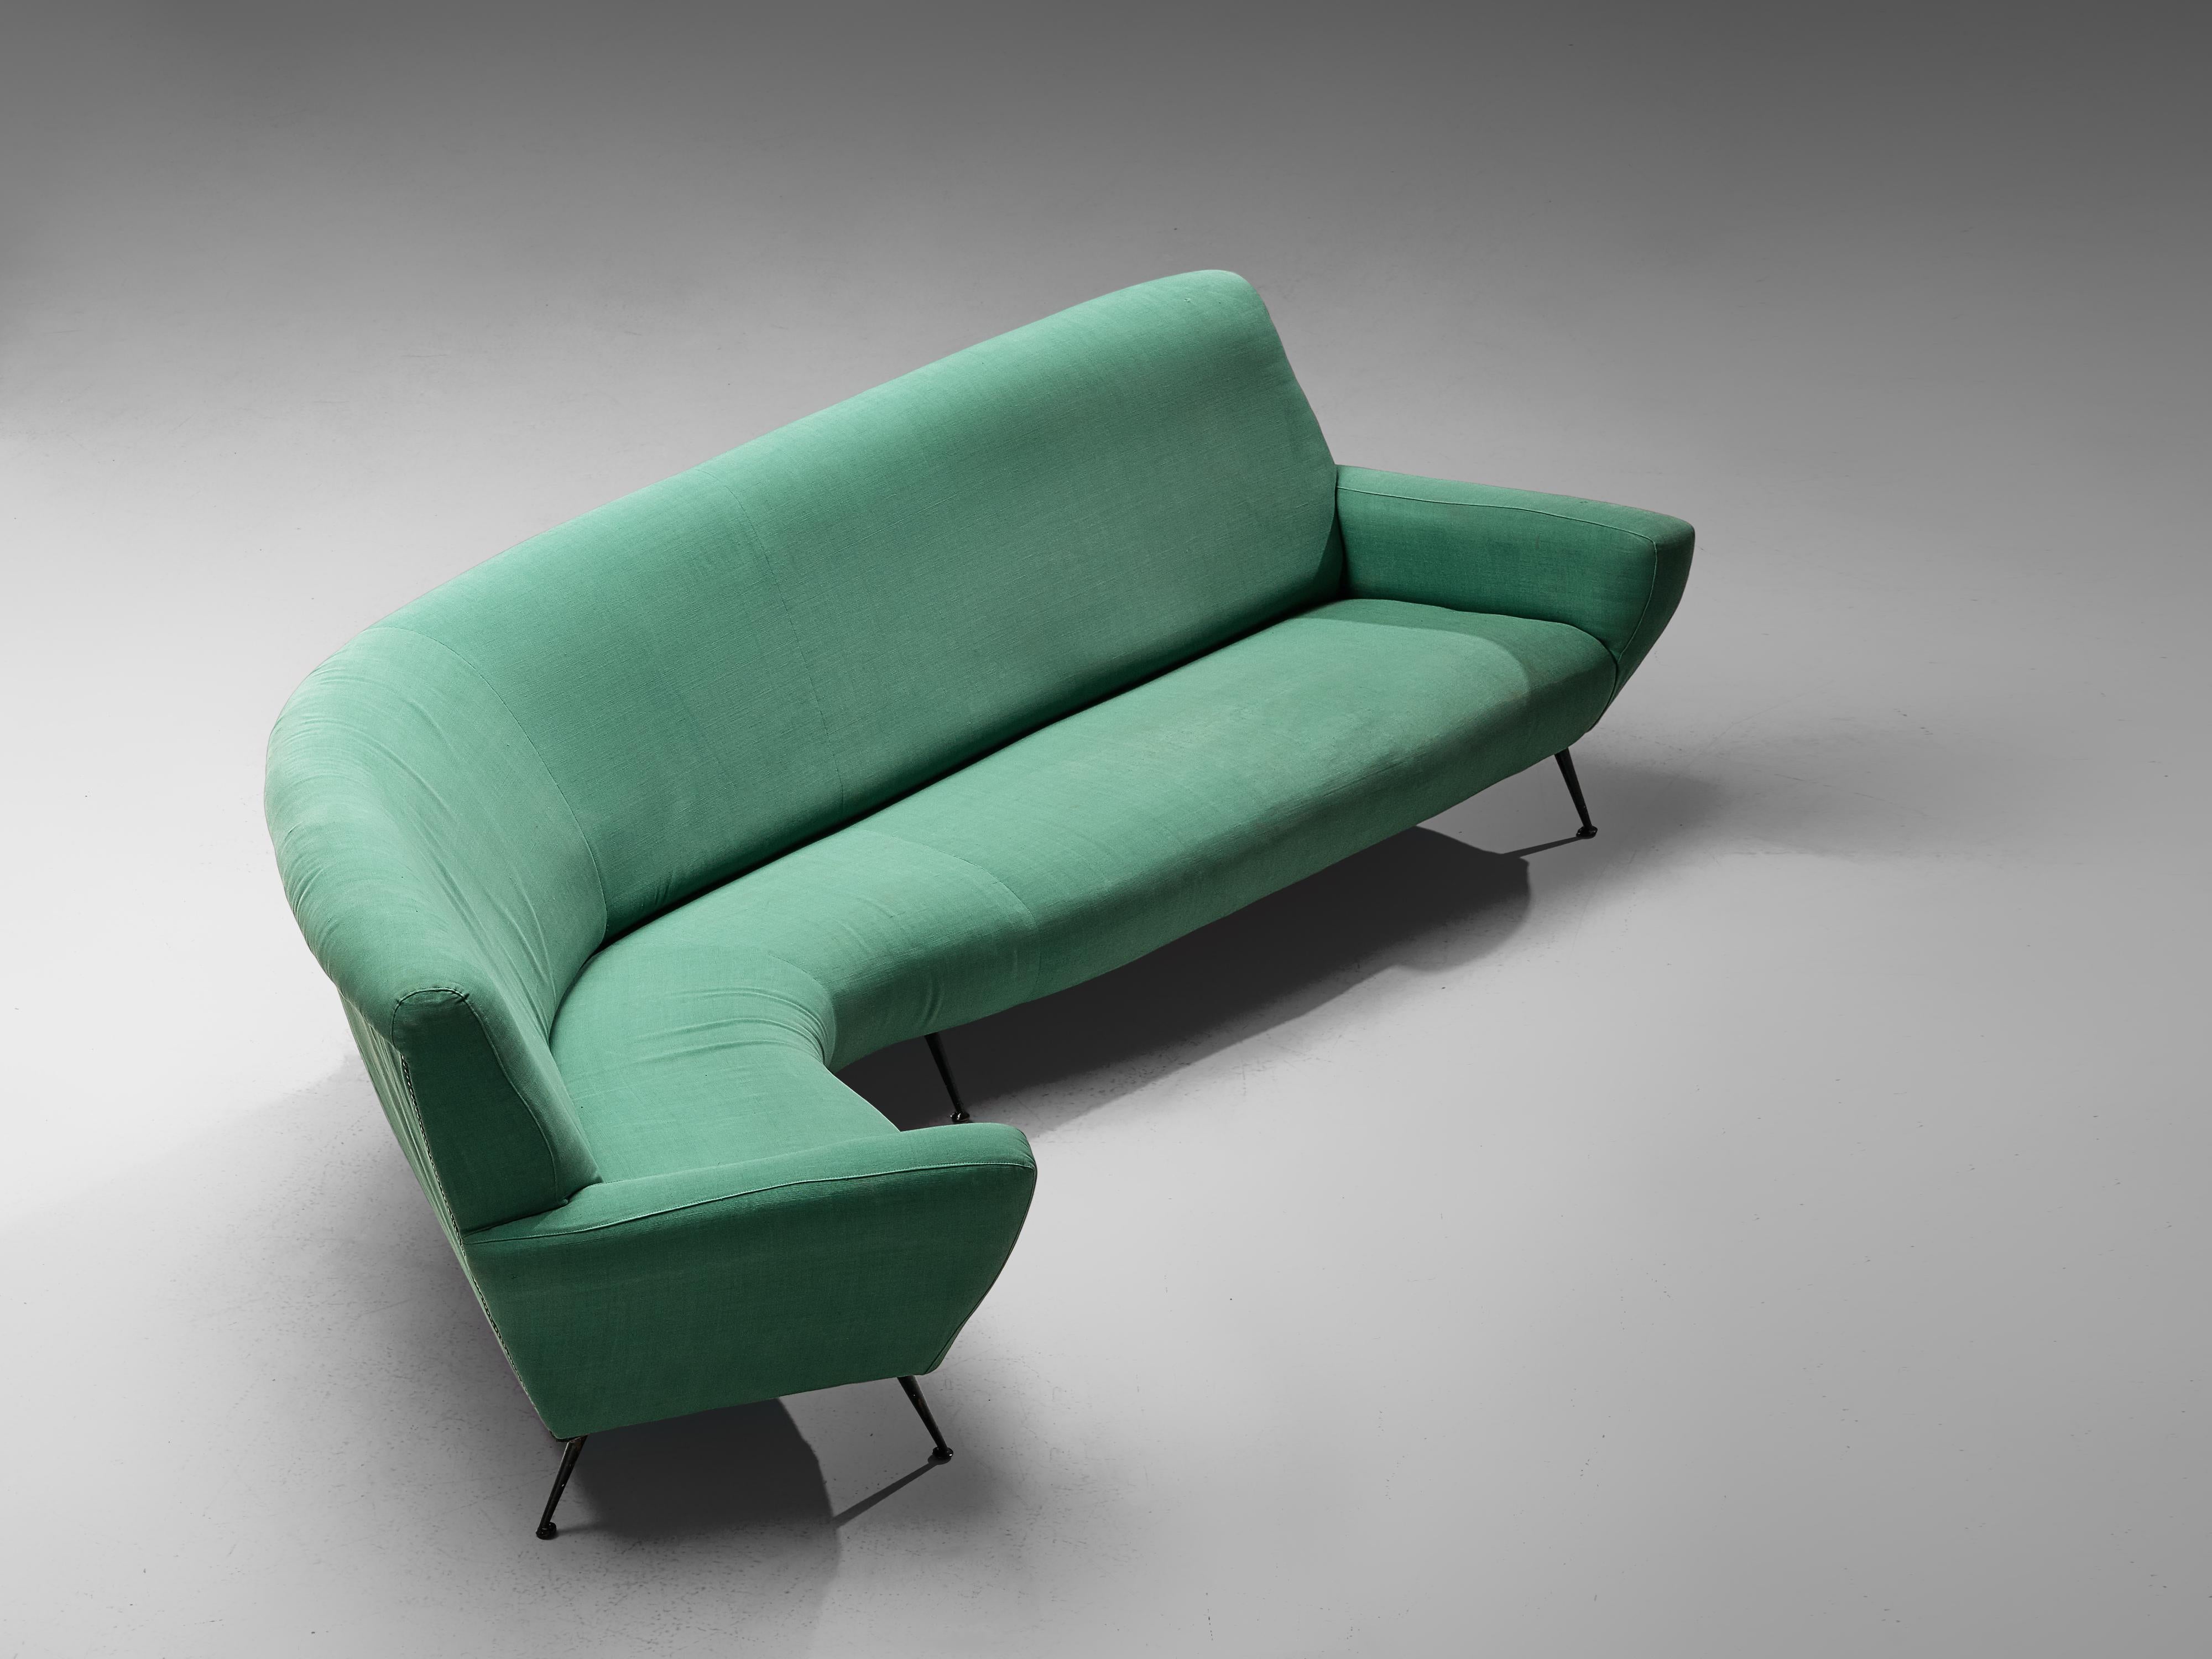 Gigi Radice for Minotti, curved sofa, green upholstery, lacquered metal, Italy, 1960s

Gorgeous curved sofa designed by Gigi Radice and manufactured by Minotti. This long sofa has a playful shape due to the curve in the design, but is very elegant